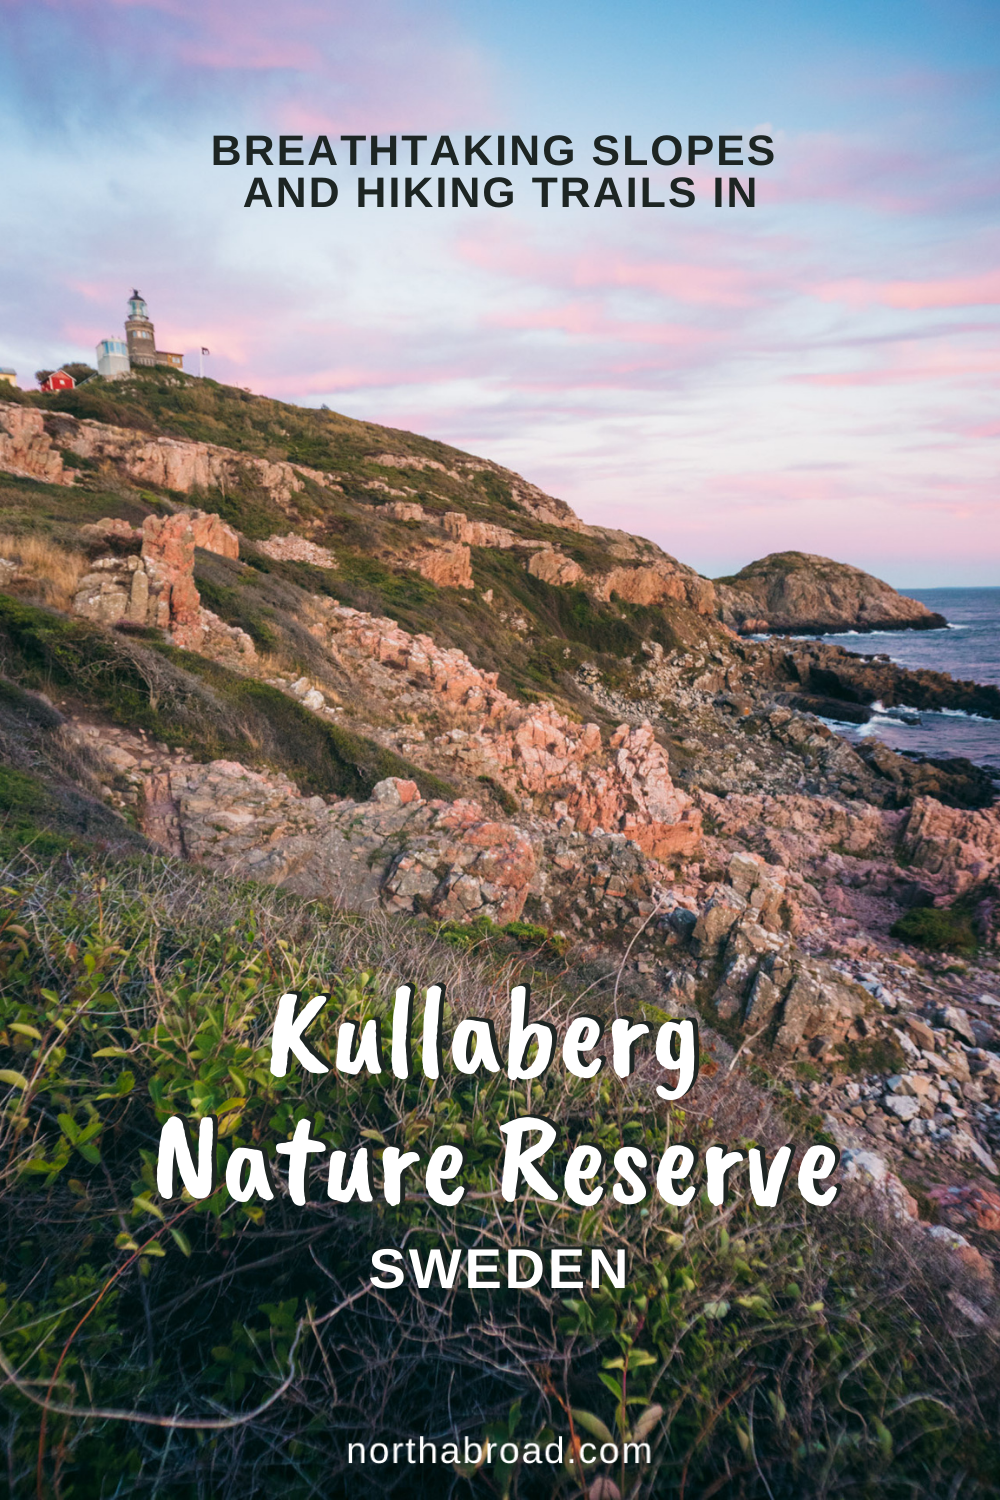 Mölle and Kullaberg Nature Reserve in Sweden